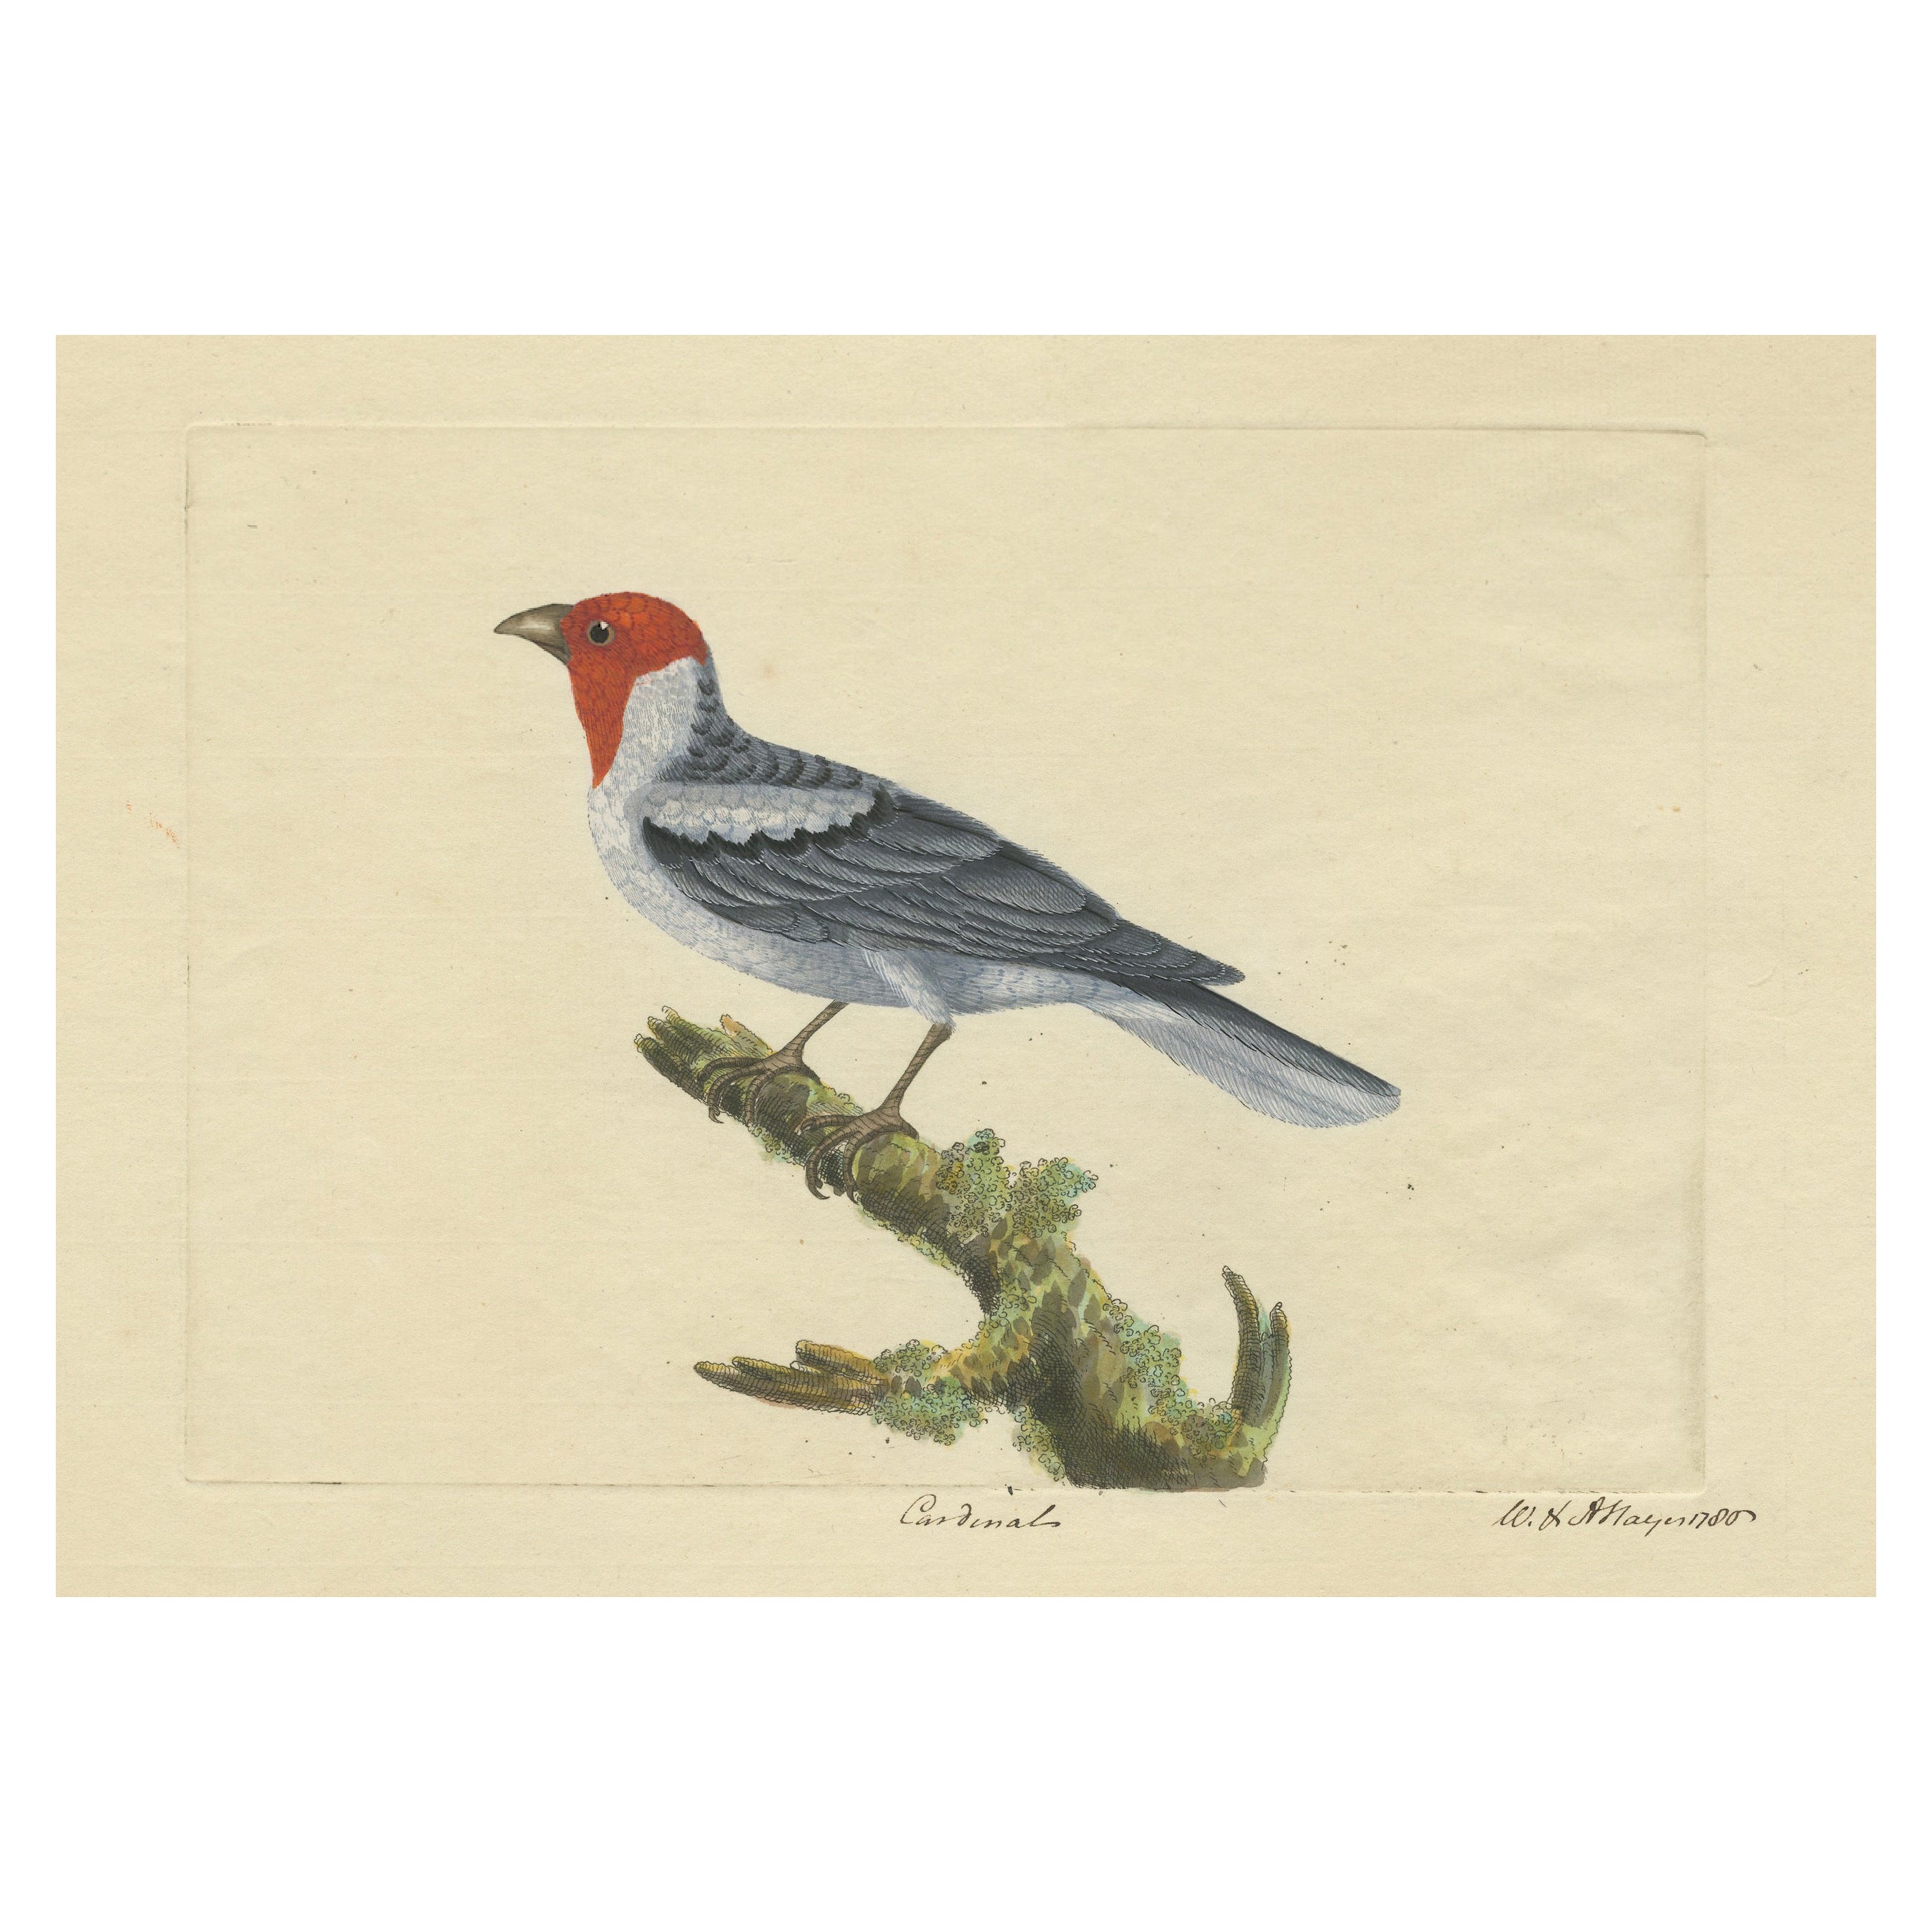 Hand-Colored Print of a Cardinal with Original Signature of William Hayes, 1780 For Sale